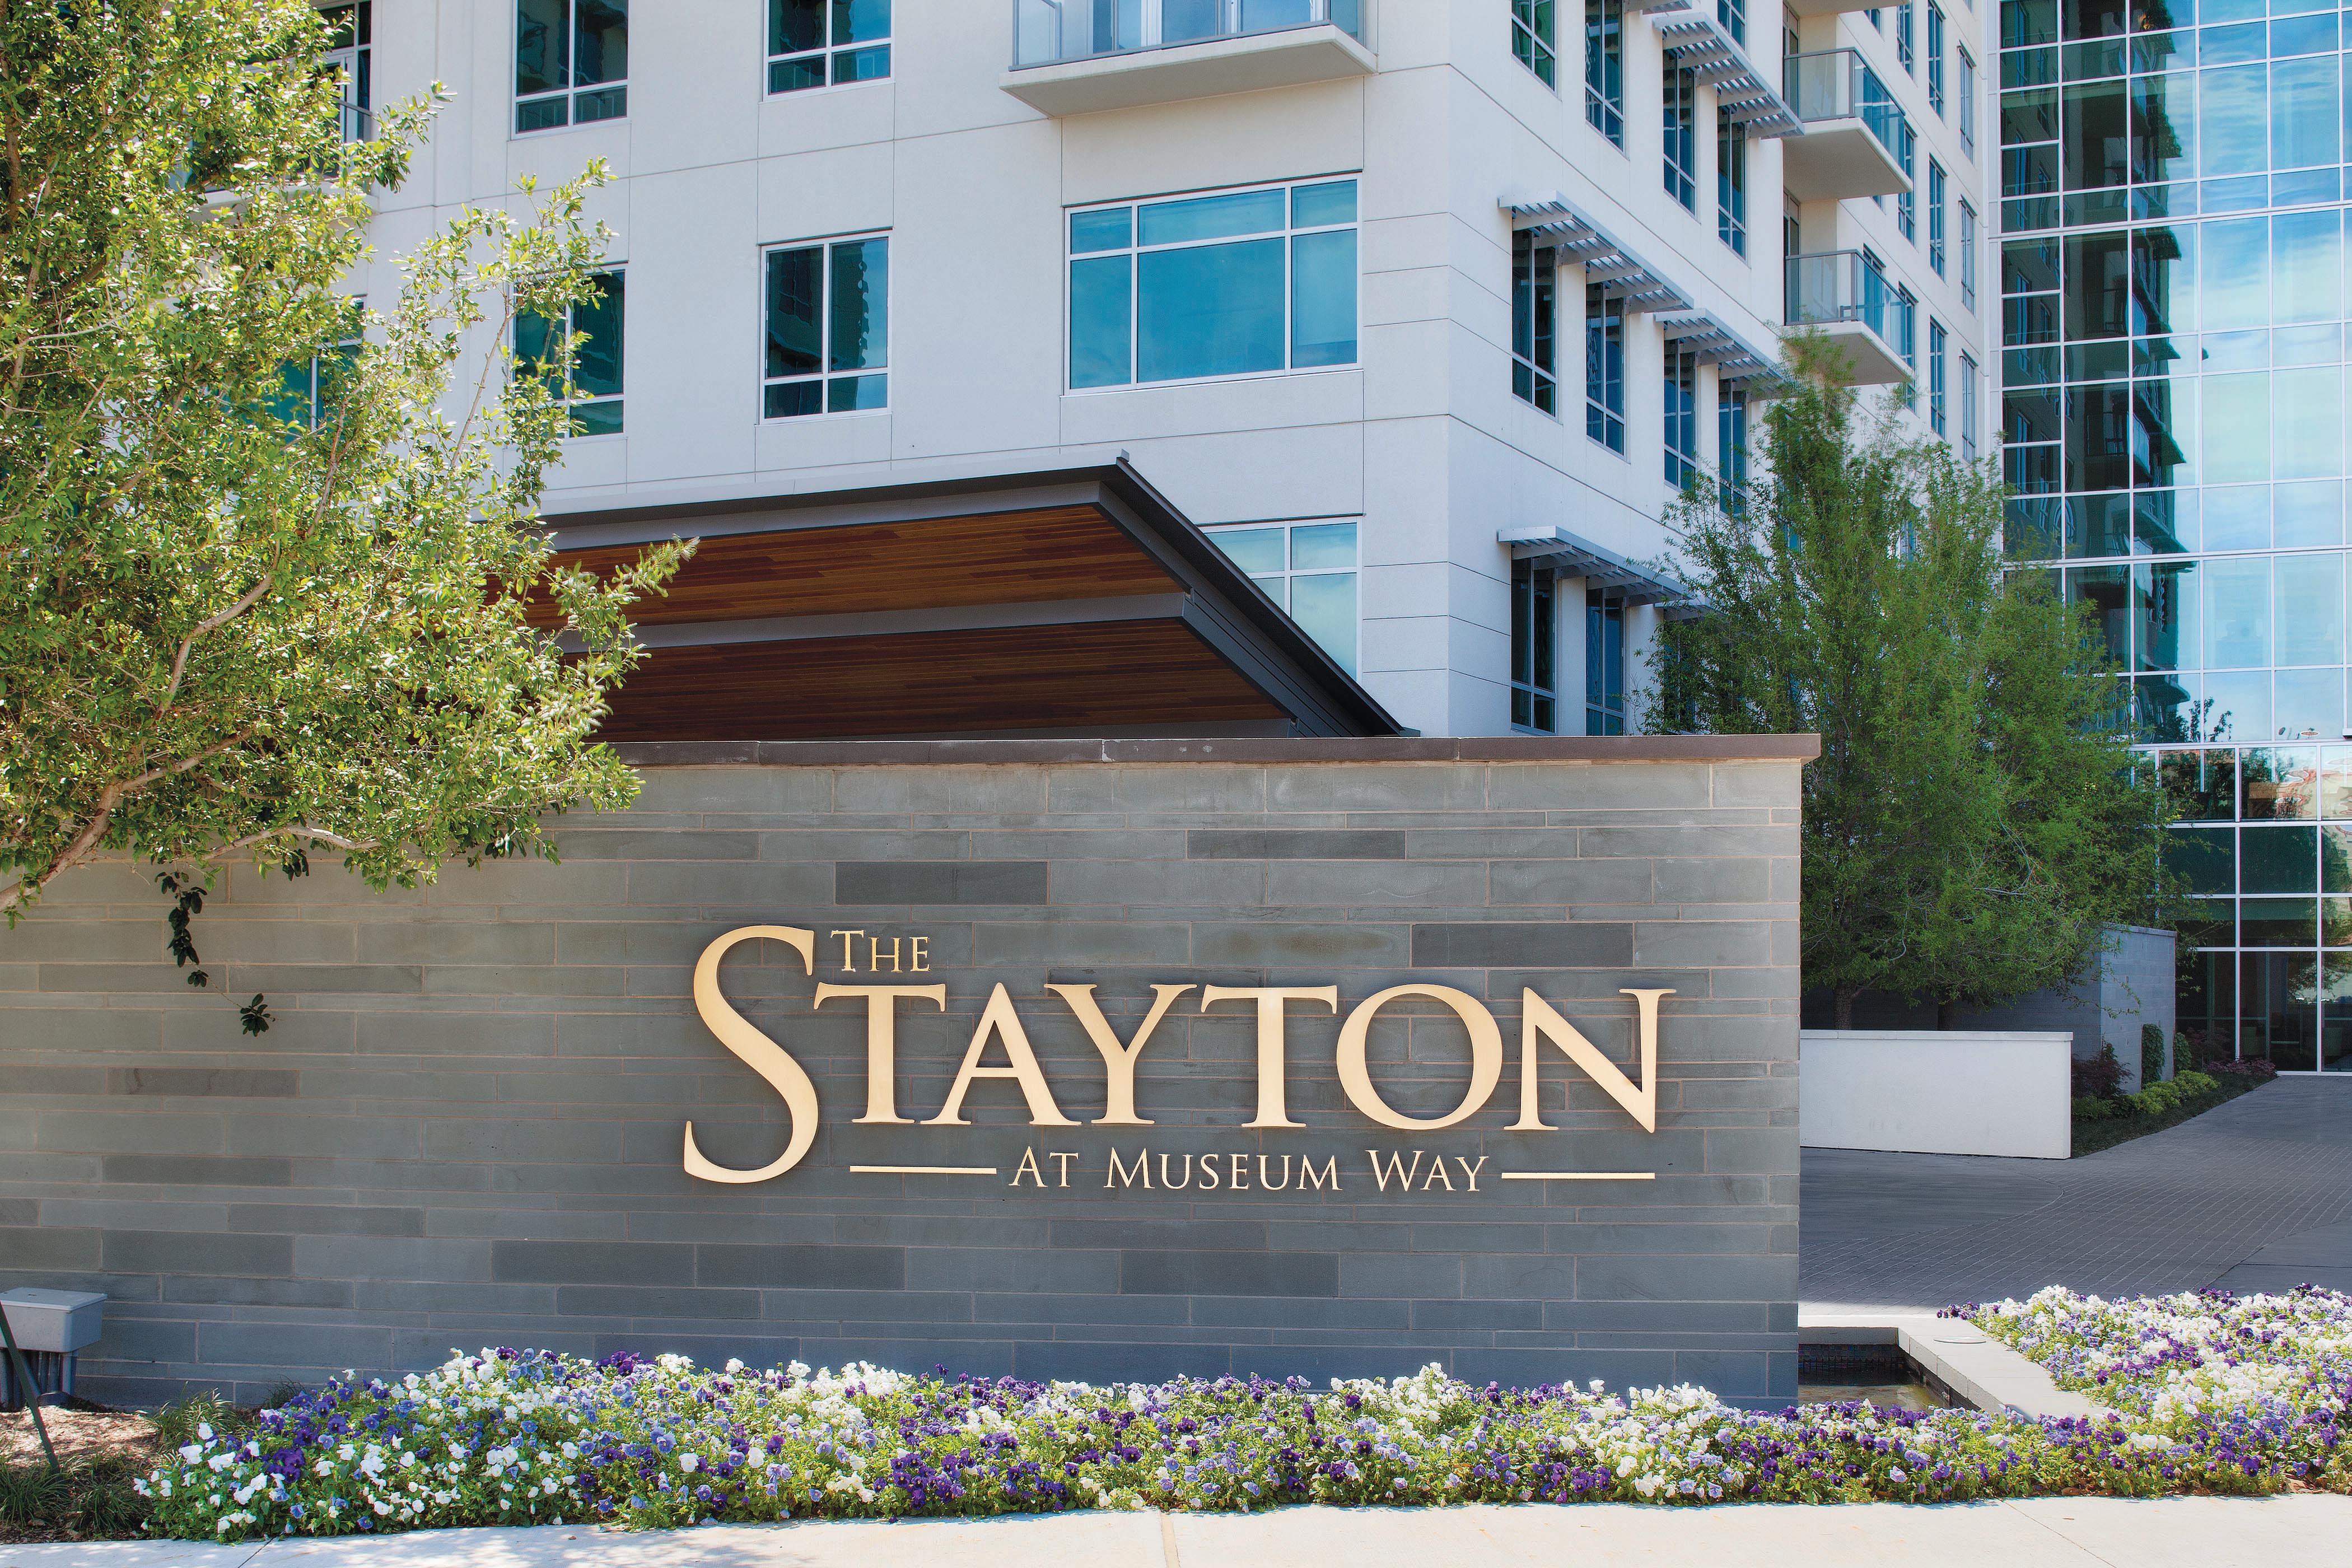 The Plaza at The Stayton at Museum Way Photo